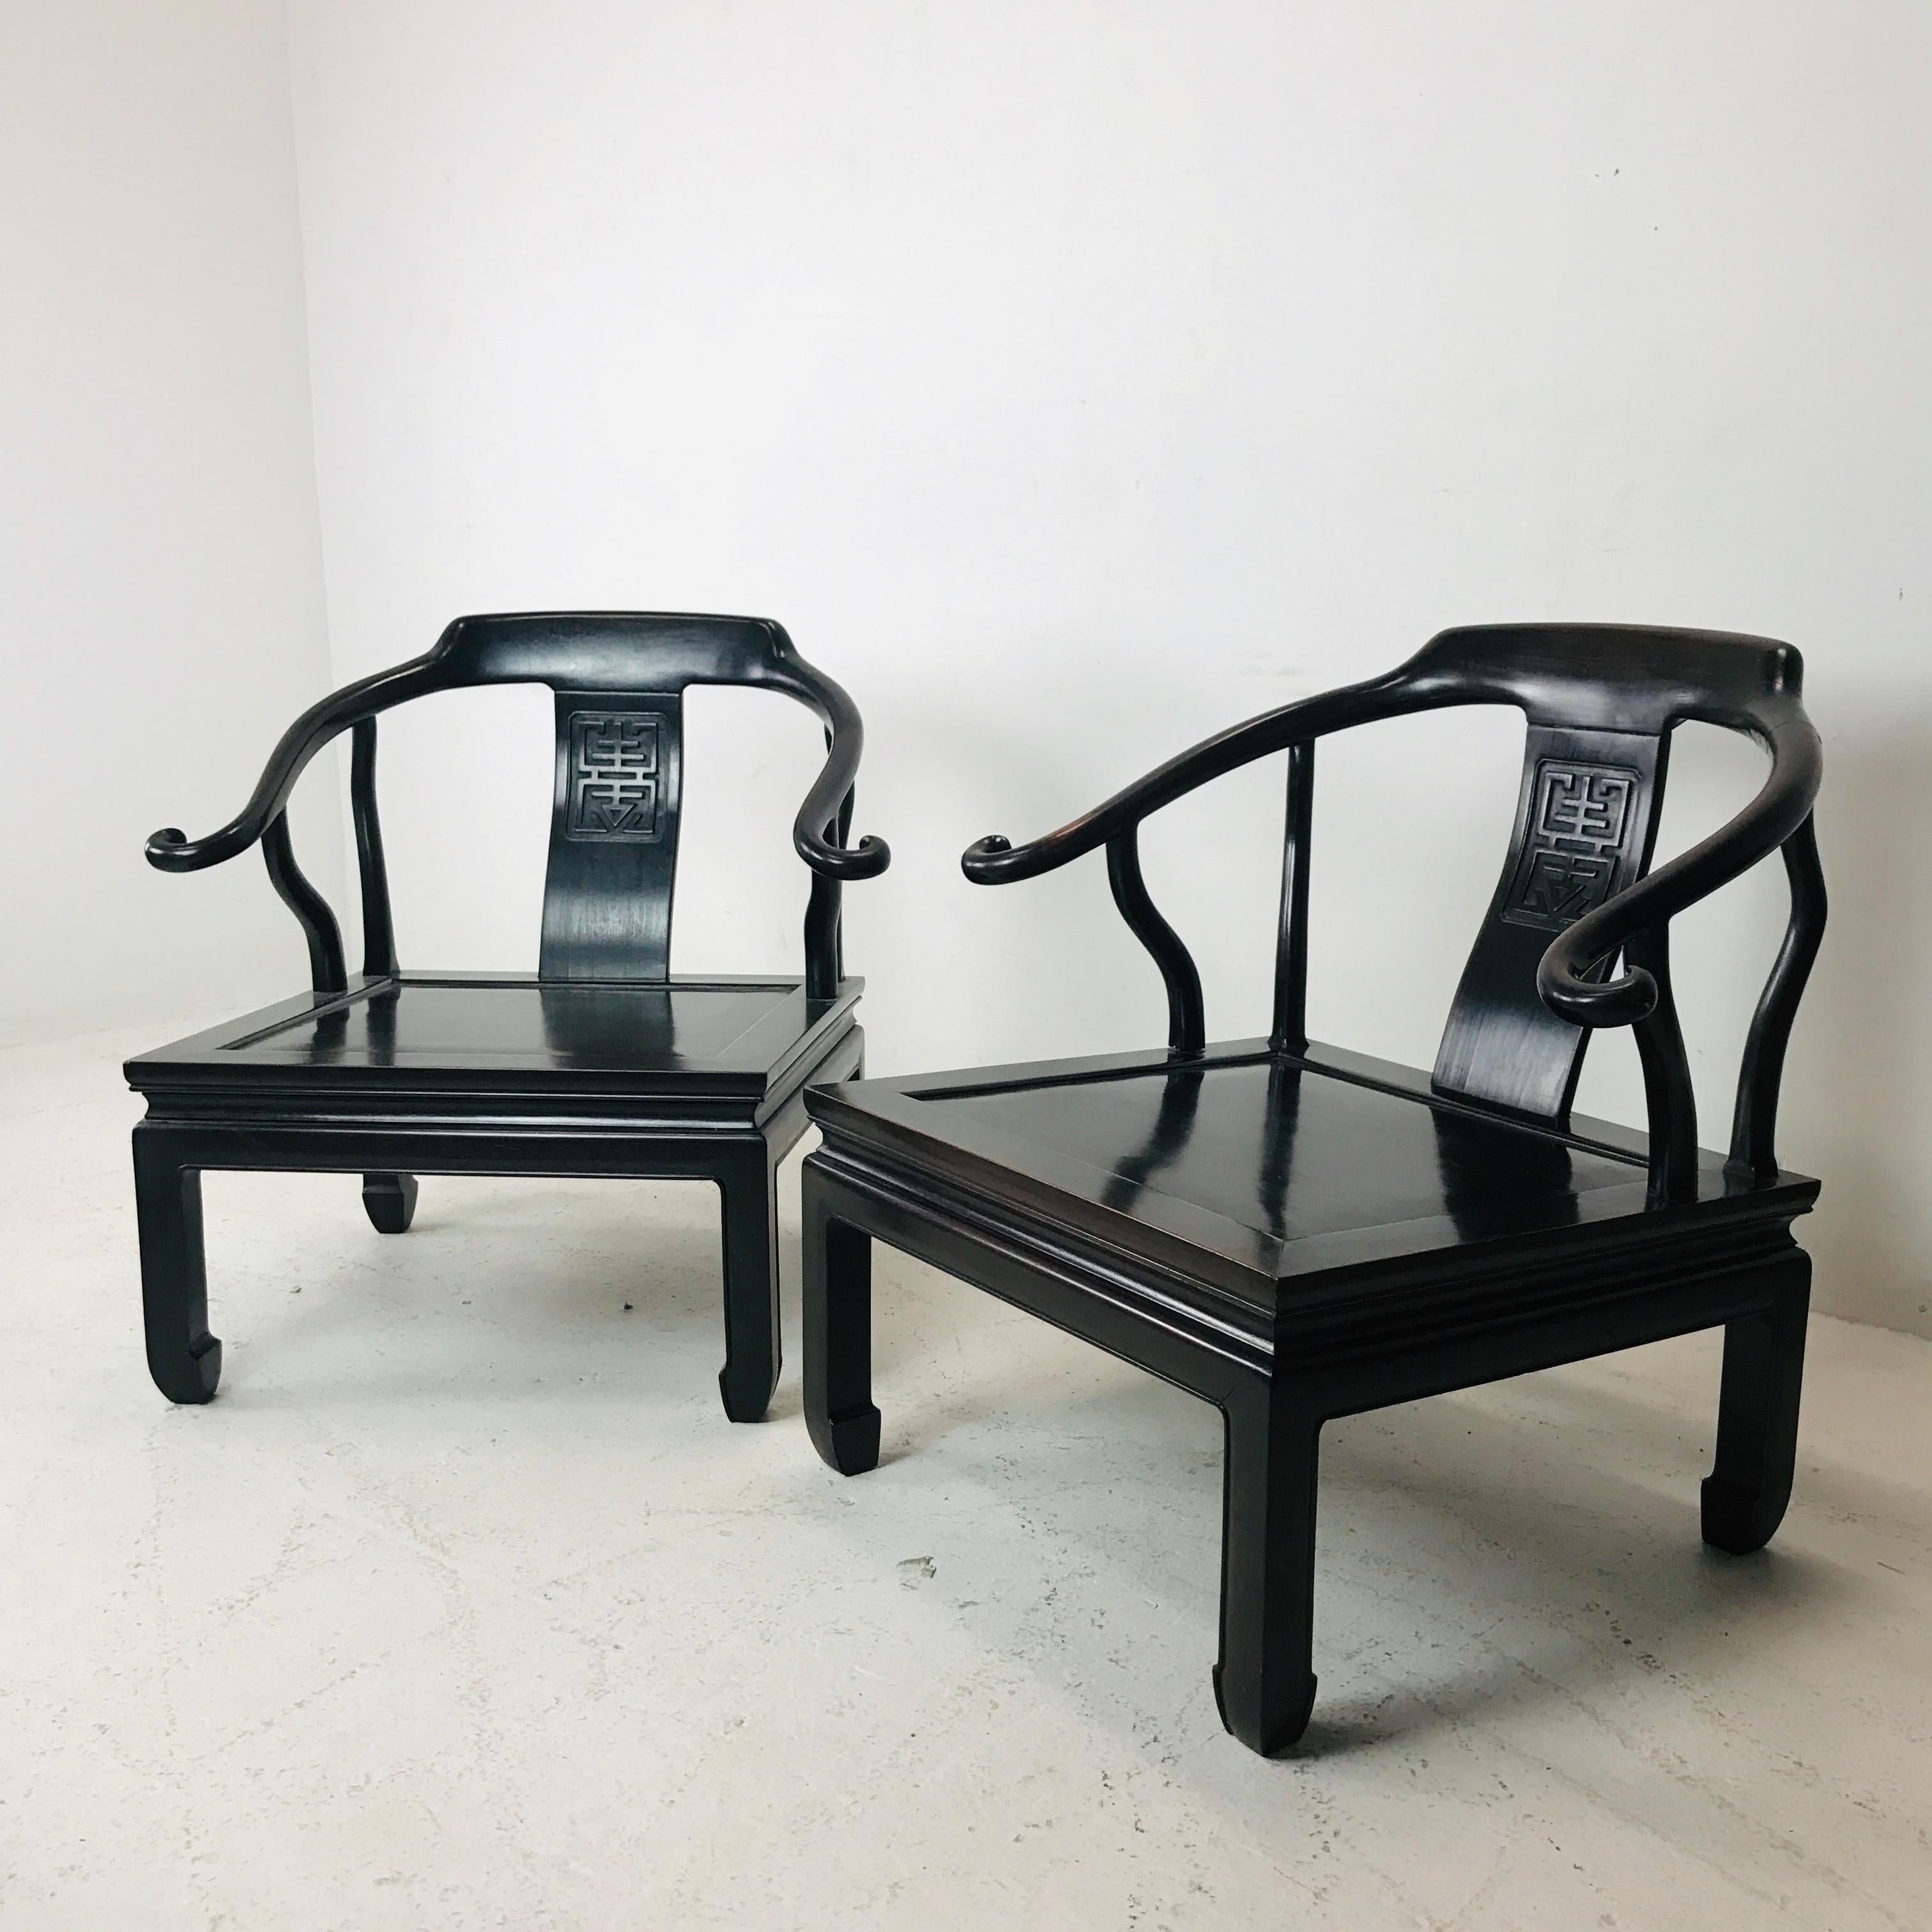 Pair of vintage Ming style rosewood chairs. Features quality solid construction, carved design details, made circa 1960s in Hong Kong. Dimensions: 28